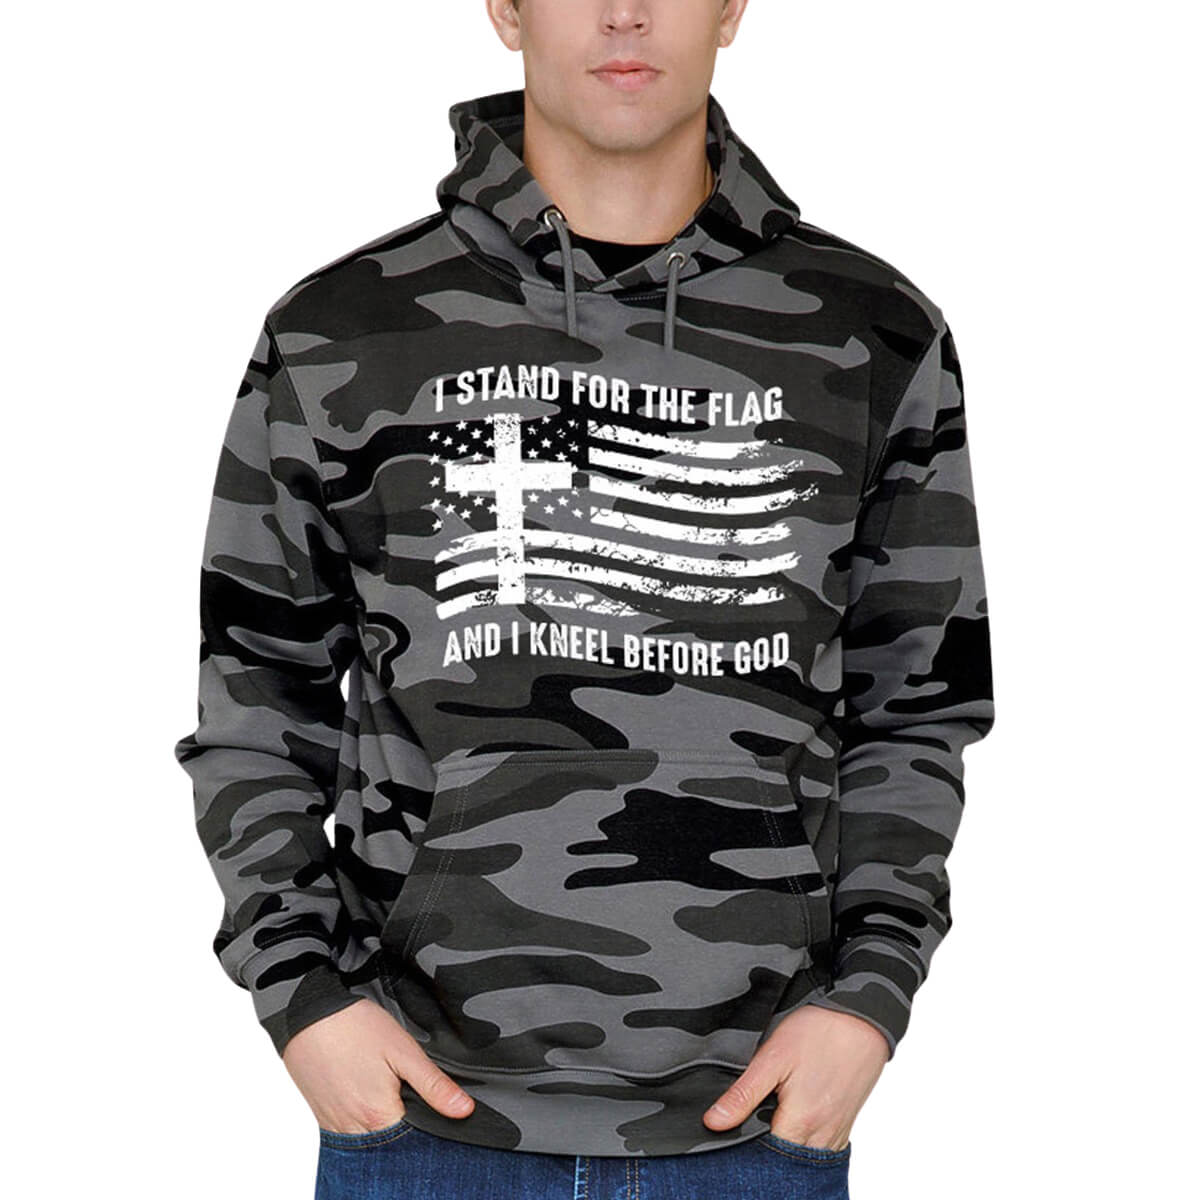 I Stand For The Flag And I Kneel Before God Camo Men's Sweatshirt Hoodie